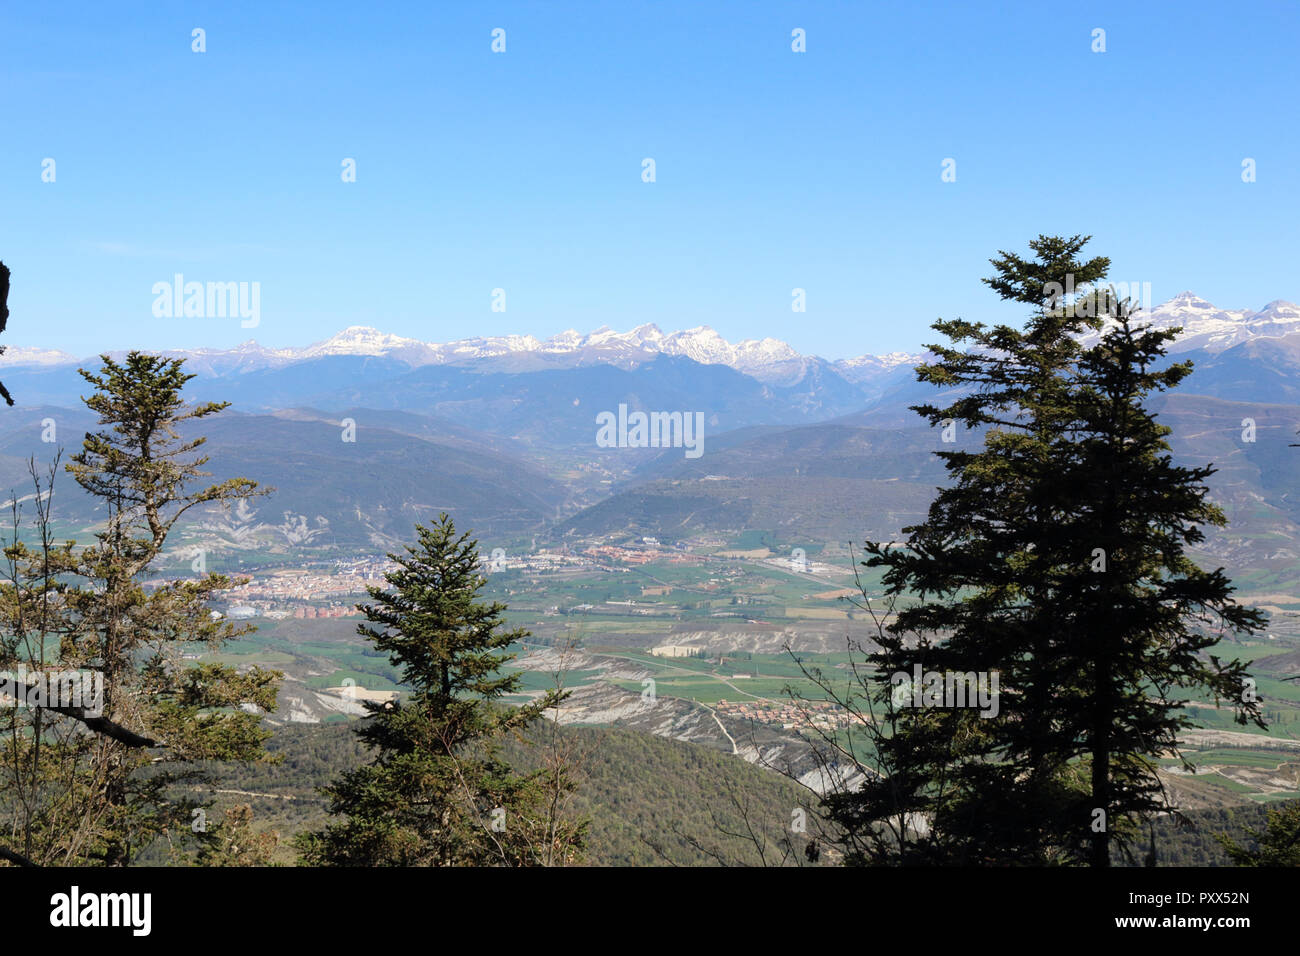 Fir and pine trees on the Peña Oroel mount, with the snow-clad Pyrenees as background, a wide valley with blue sky and some bushes, in Aragon, Spain Stock Photo